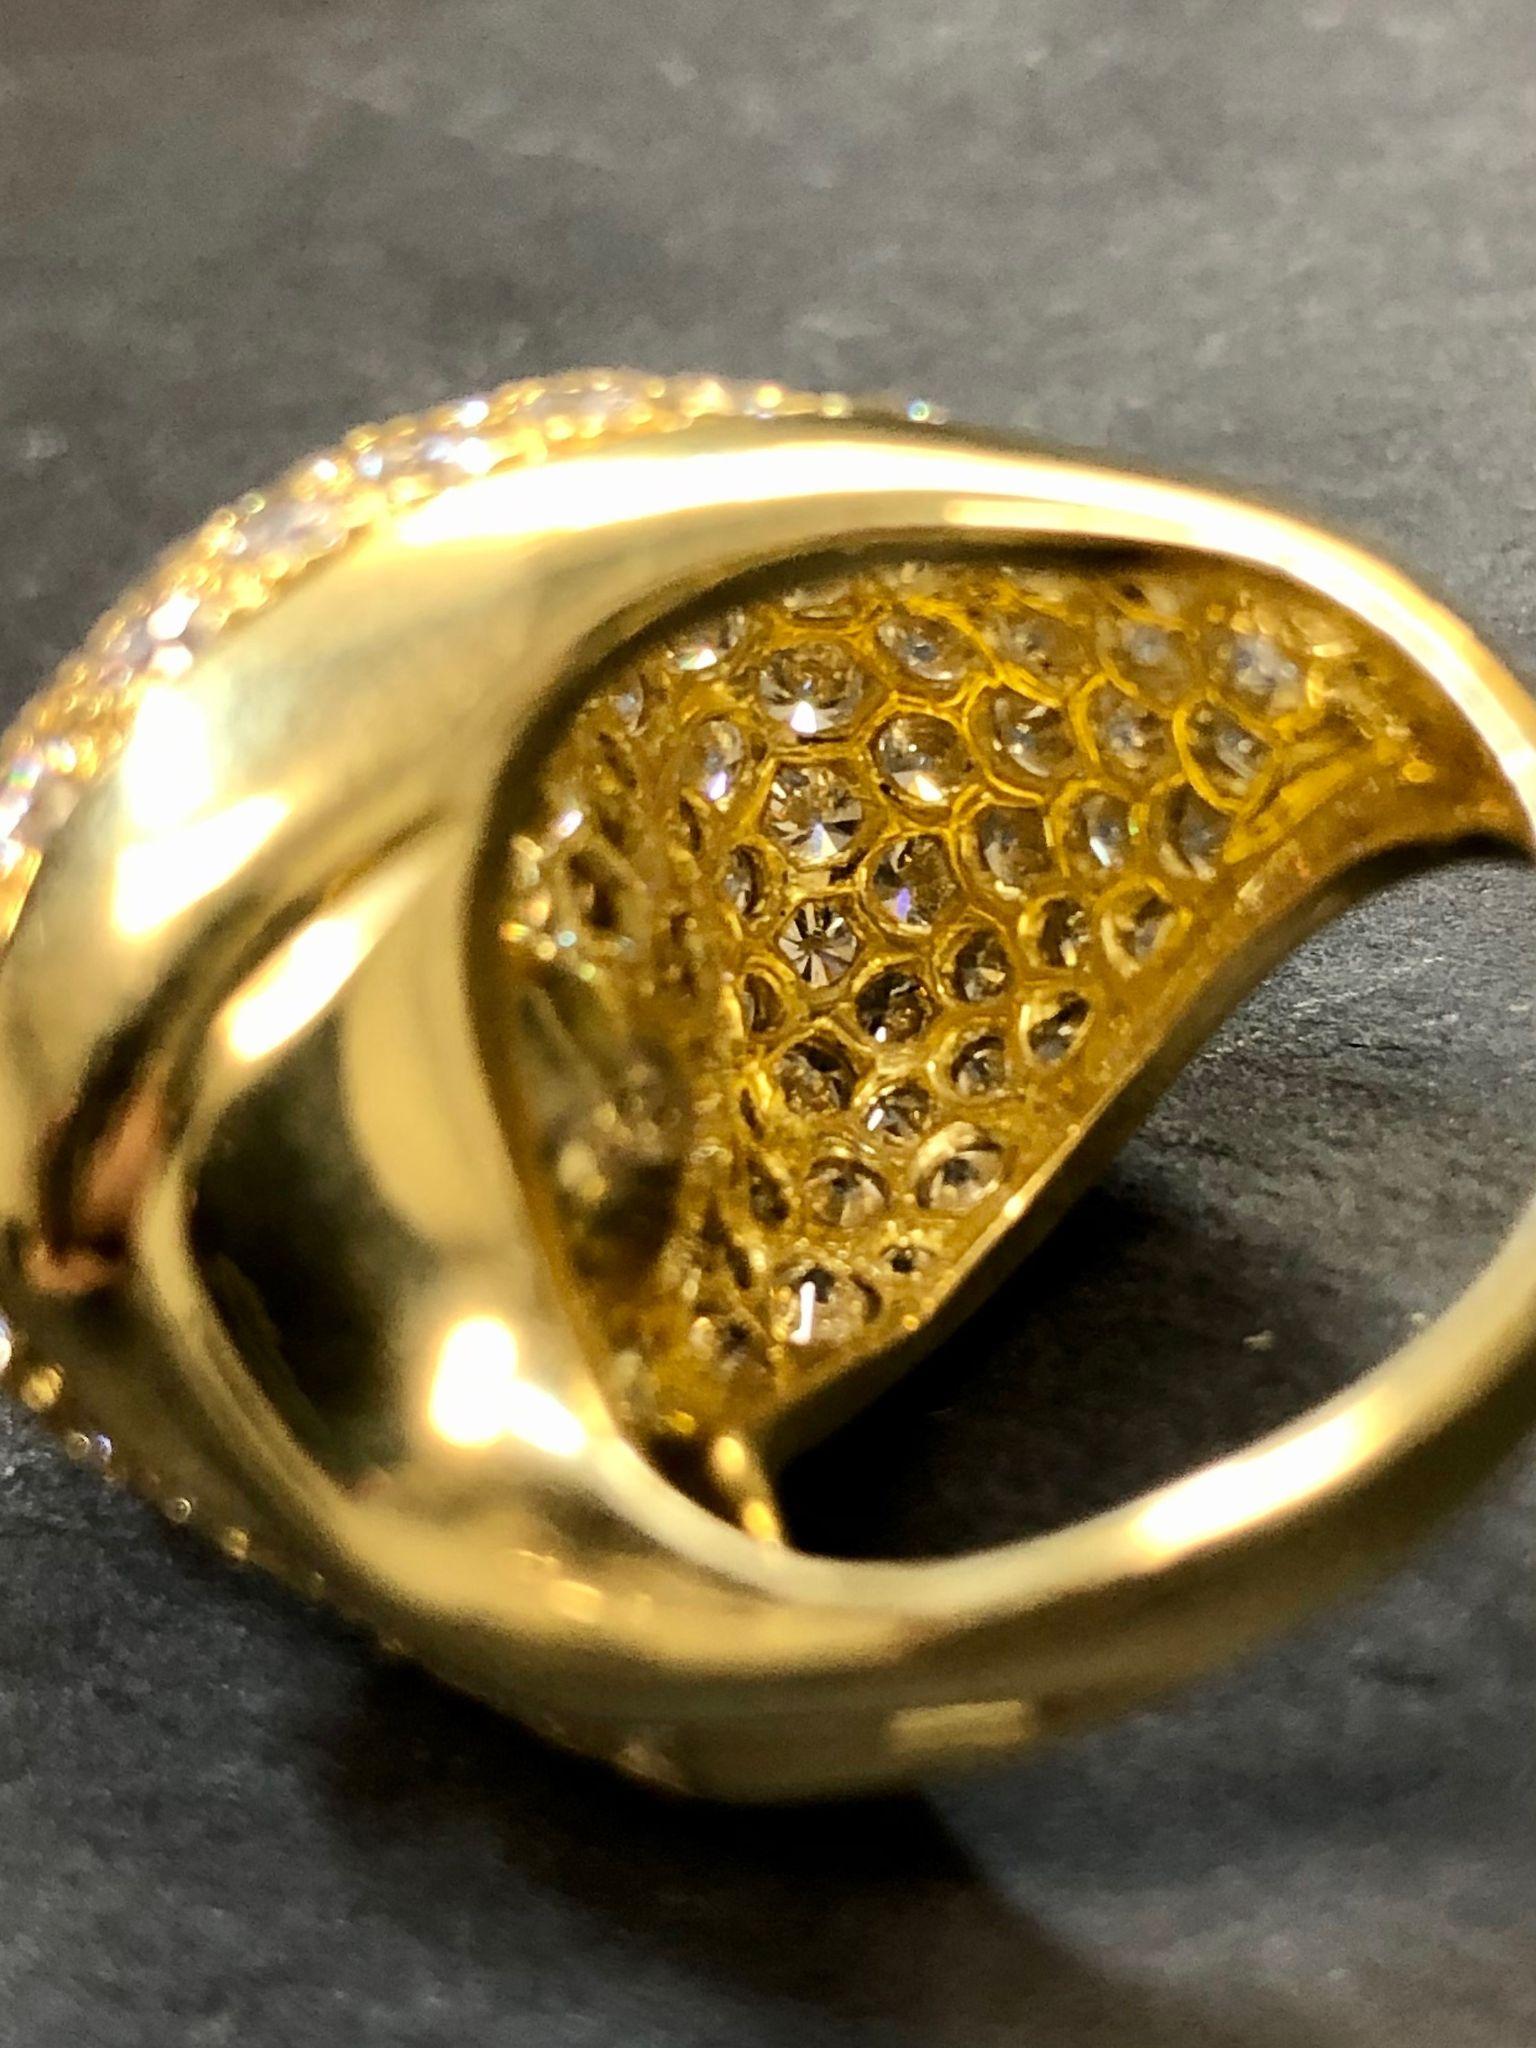 A beautifully made vintage ring by famed jewelry designer Jose Hess (who is no longer with us). It is done in 18K yellow gold and set with approximately 5.85cttw in F-G color and Vs1 clarity diamonds and centered by a 12mm cream colored South Sea